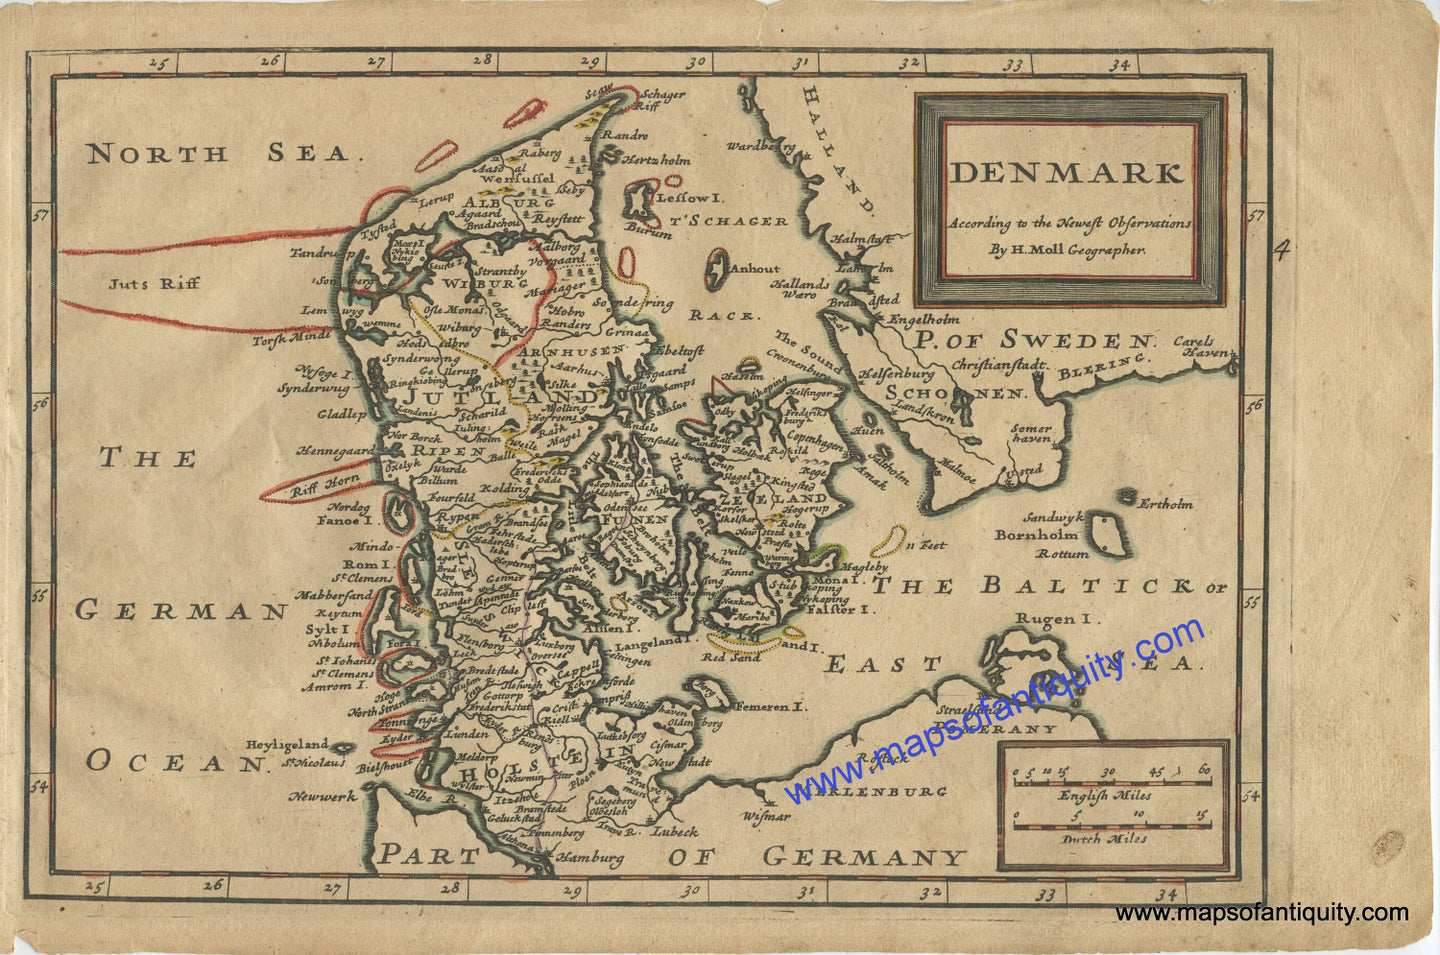 Antique-Hand-Colored-Map-Denmark-According-to-the-Newest-Observations-Europe-Denmark-c.-1730-Moll-Maps-Of-Antiquity